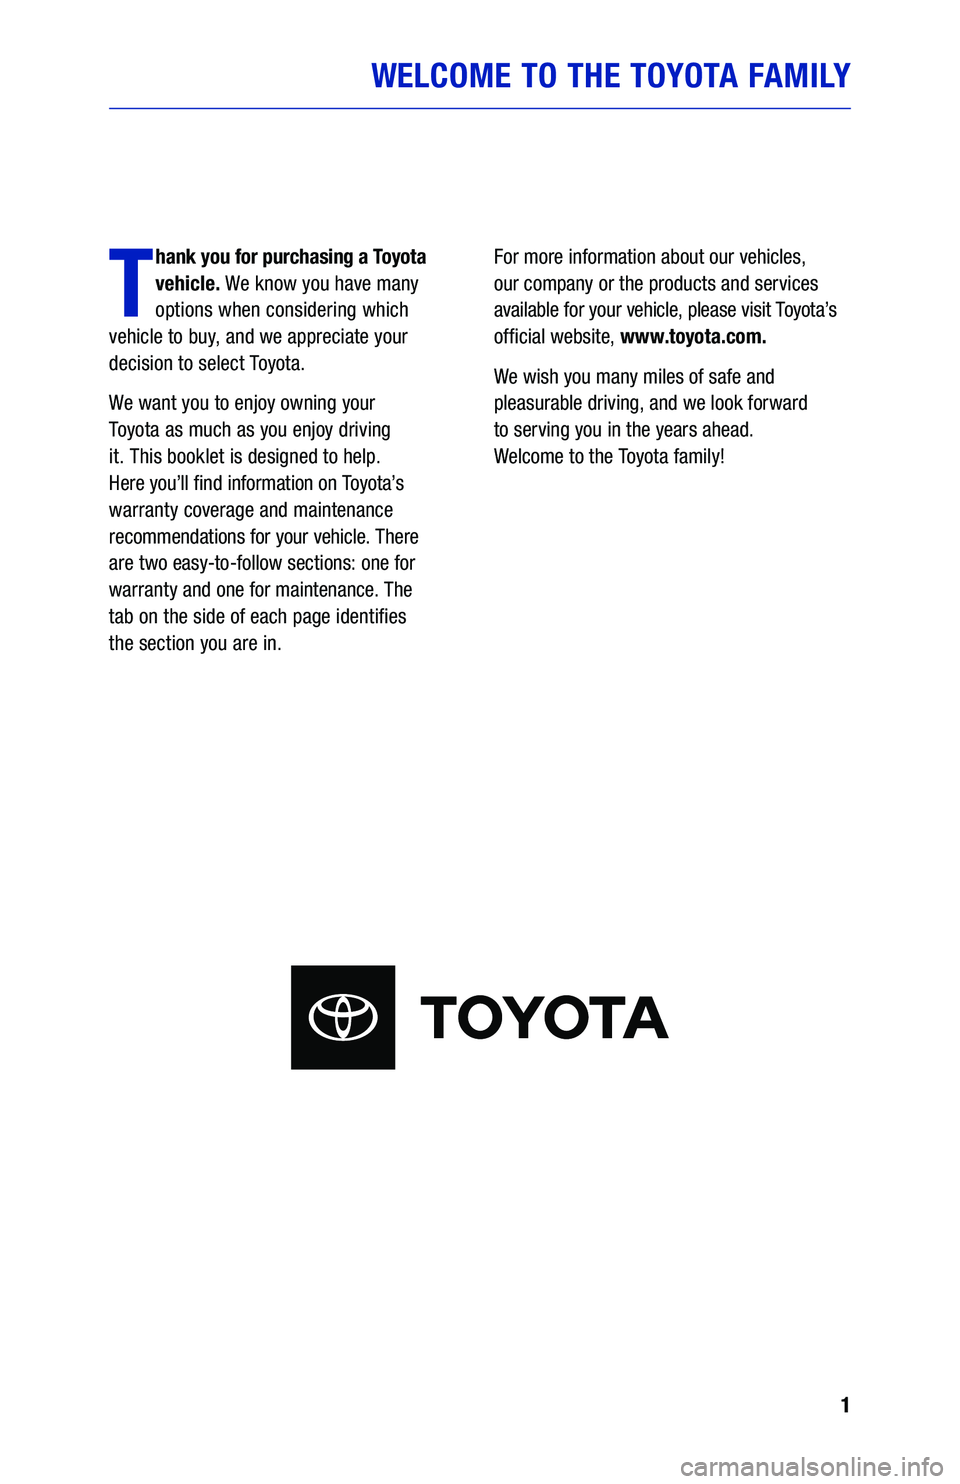 TOYOTA RAV4 HYBRID 2020  Warranties & Maintenance Guides (in English) 1
WELCOME TO THE  TOYOTA  FAMILY
T
hank you for purchasing  a Toyota  
vehicle.  We know  you have  many 
options  when considering  which  
vehicle  to buy,  and we appreciate  your 
decision  to sel